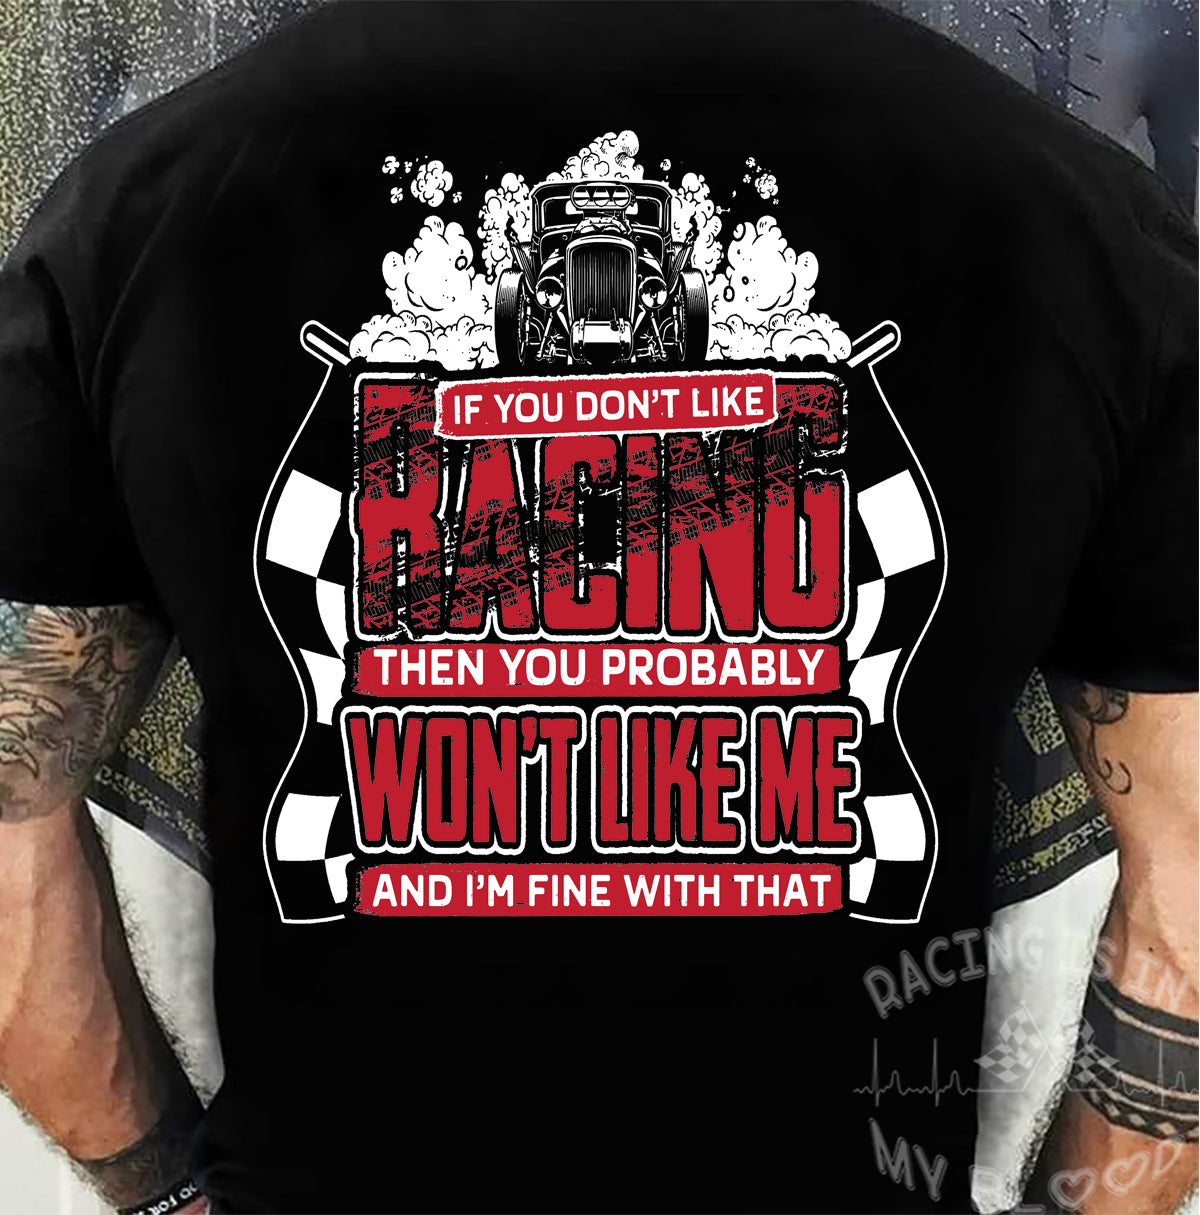 If You Don't Like Racing Then Probably You Won't Like Me And I'm Fine With That T-Shirts!